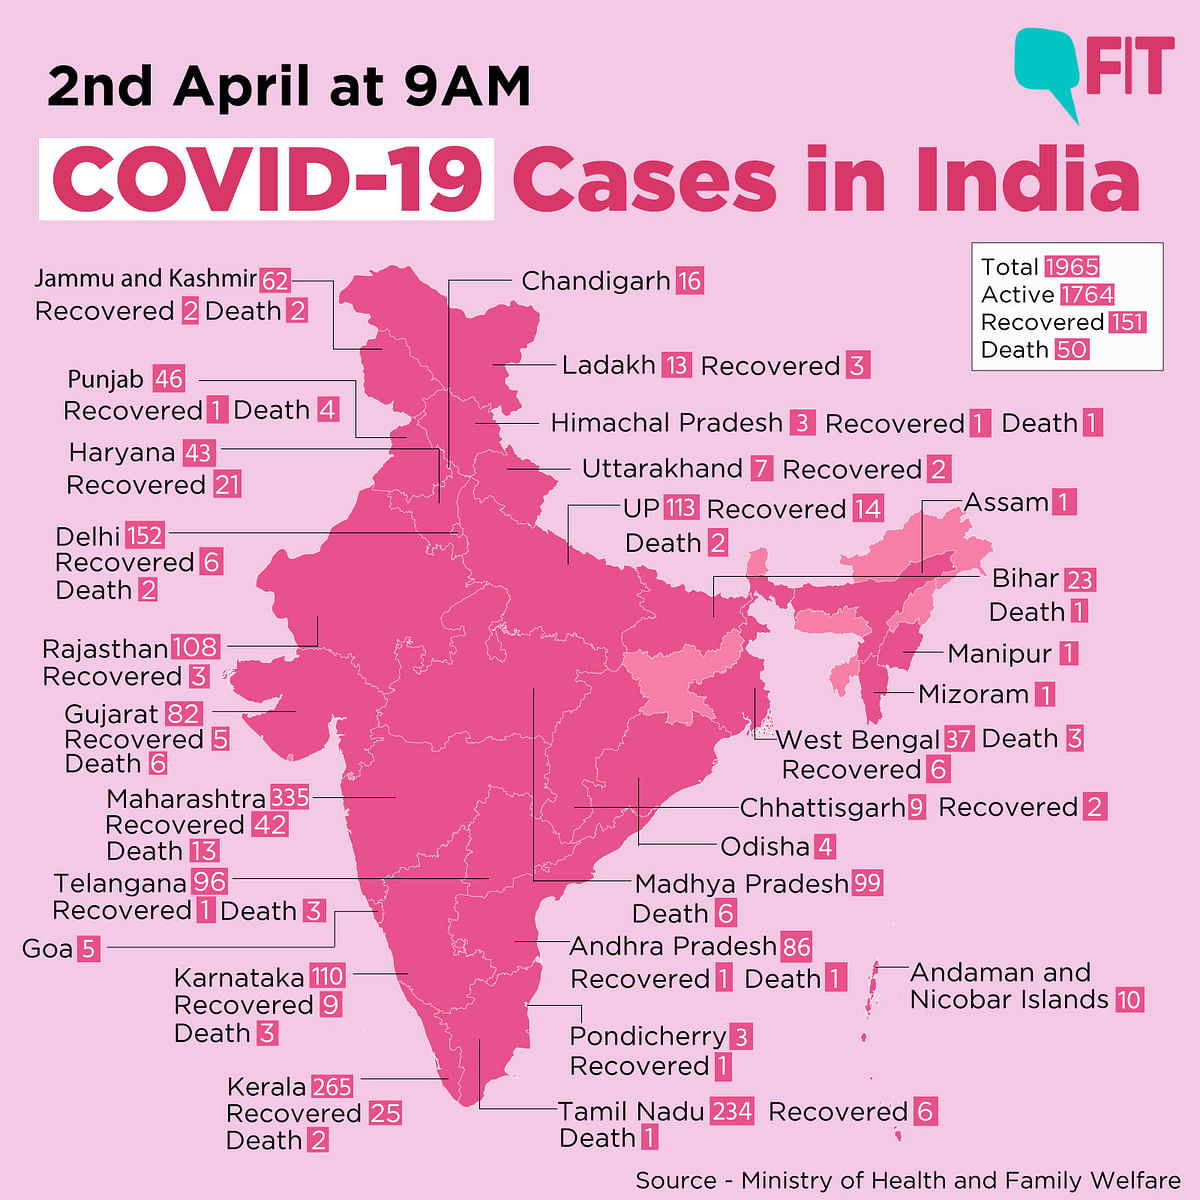 COVID-19 India Update: Death Toll Touches 50, Cases Rise to 1,965